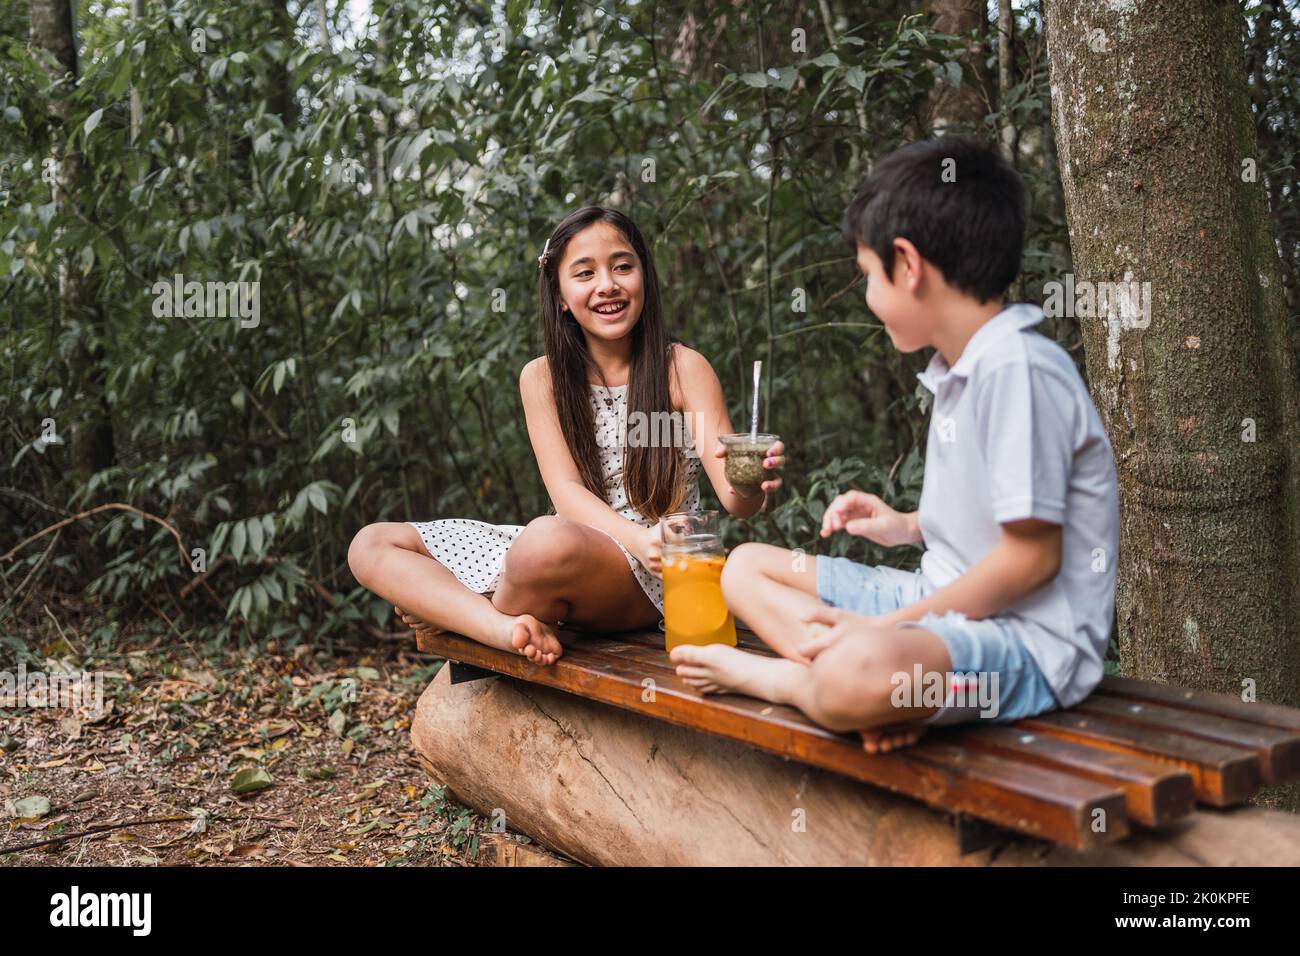 Cheerful barefoot child passing calabash gourd of herbal tea to sibling while looking at each other on bench in summer Stock Photo